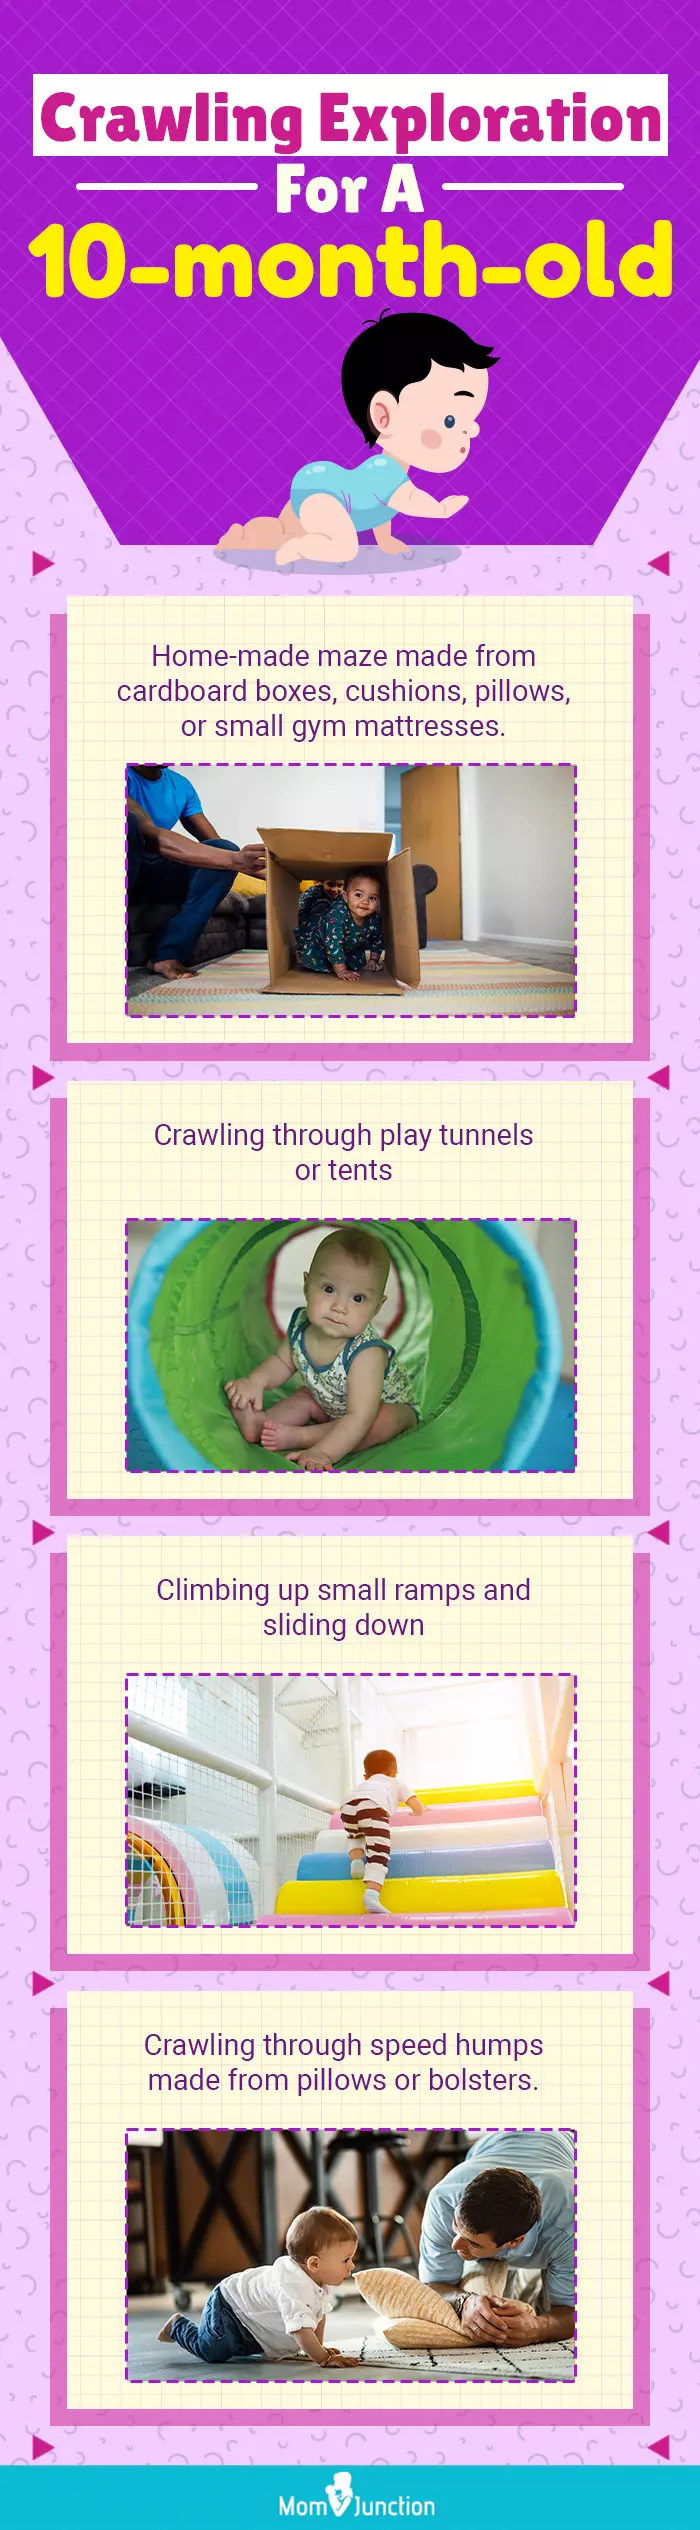 crawling exploration for a 10 month old (infographic)